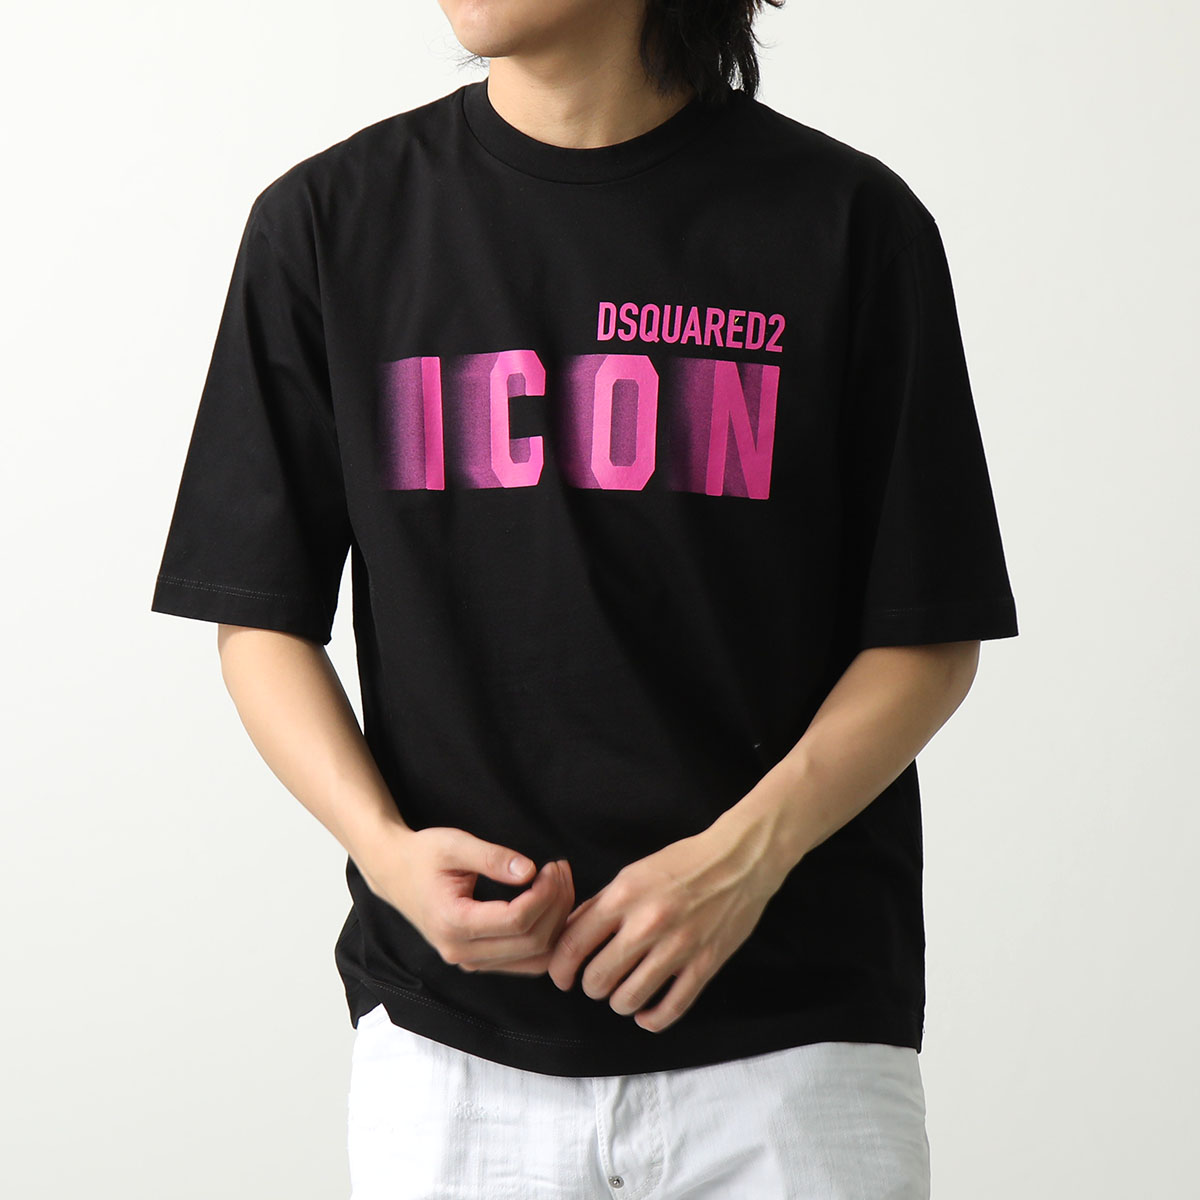 DSQUARED2 ディースクエアード Tシャツ ICON BLUR LOOSE FIT TEE 